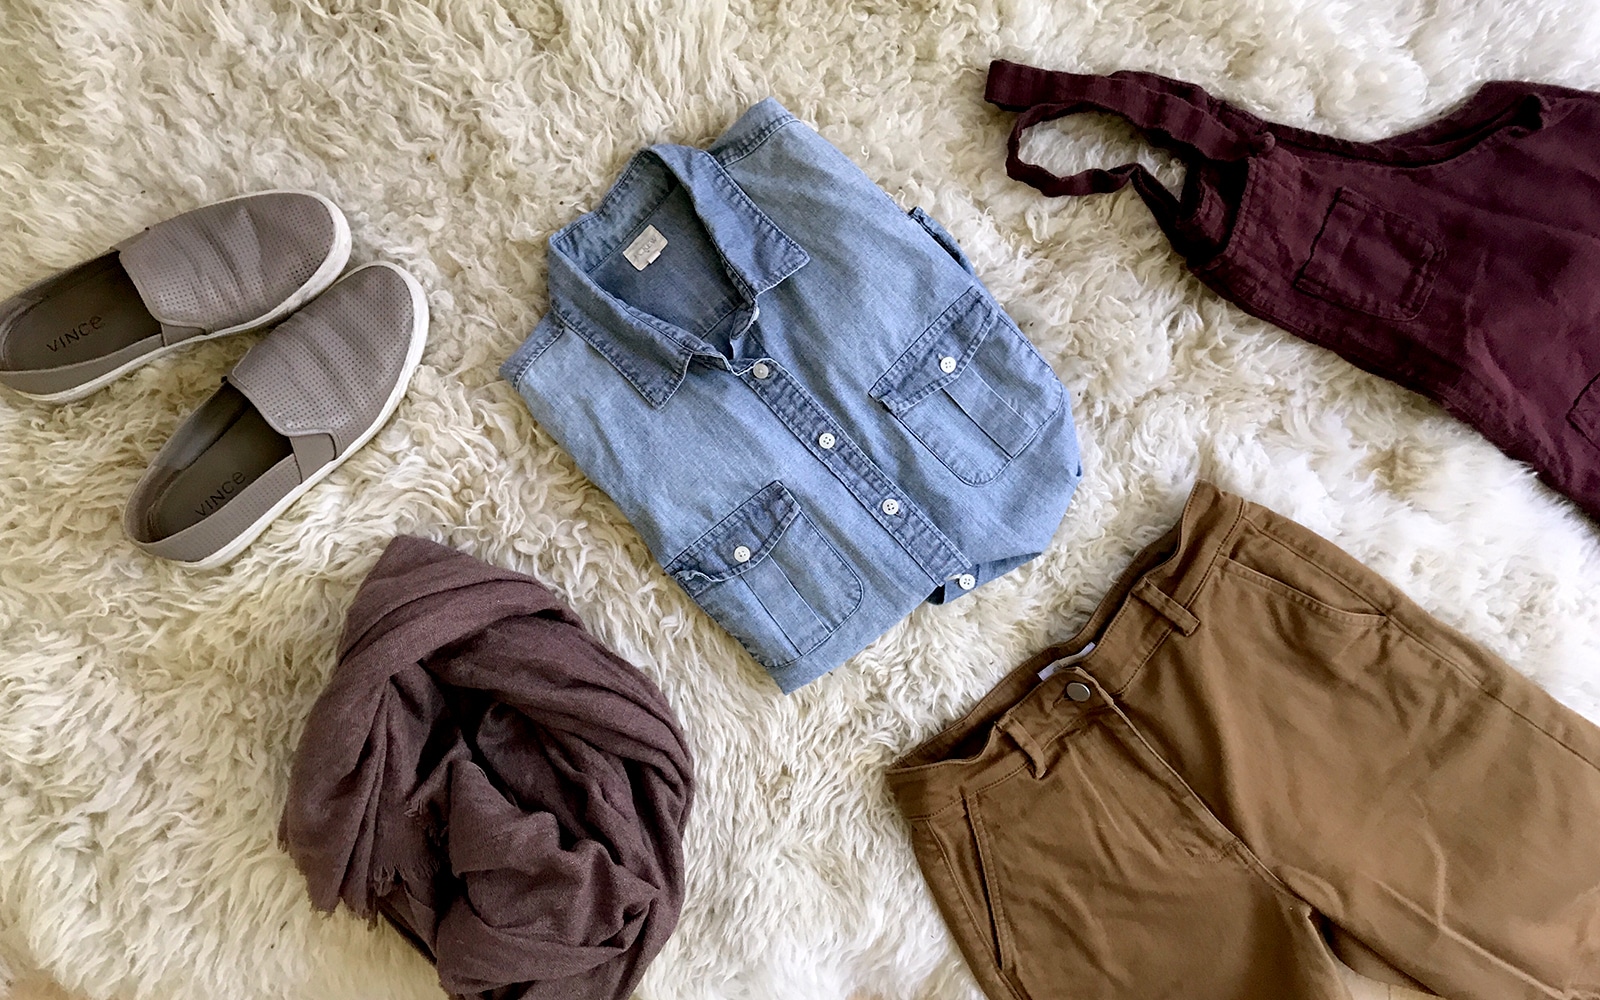 This is your guide to your Fall Wardrobe Essentials. A Fall Capsule Wardrobe from The Fresh Exchange.